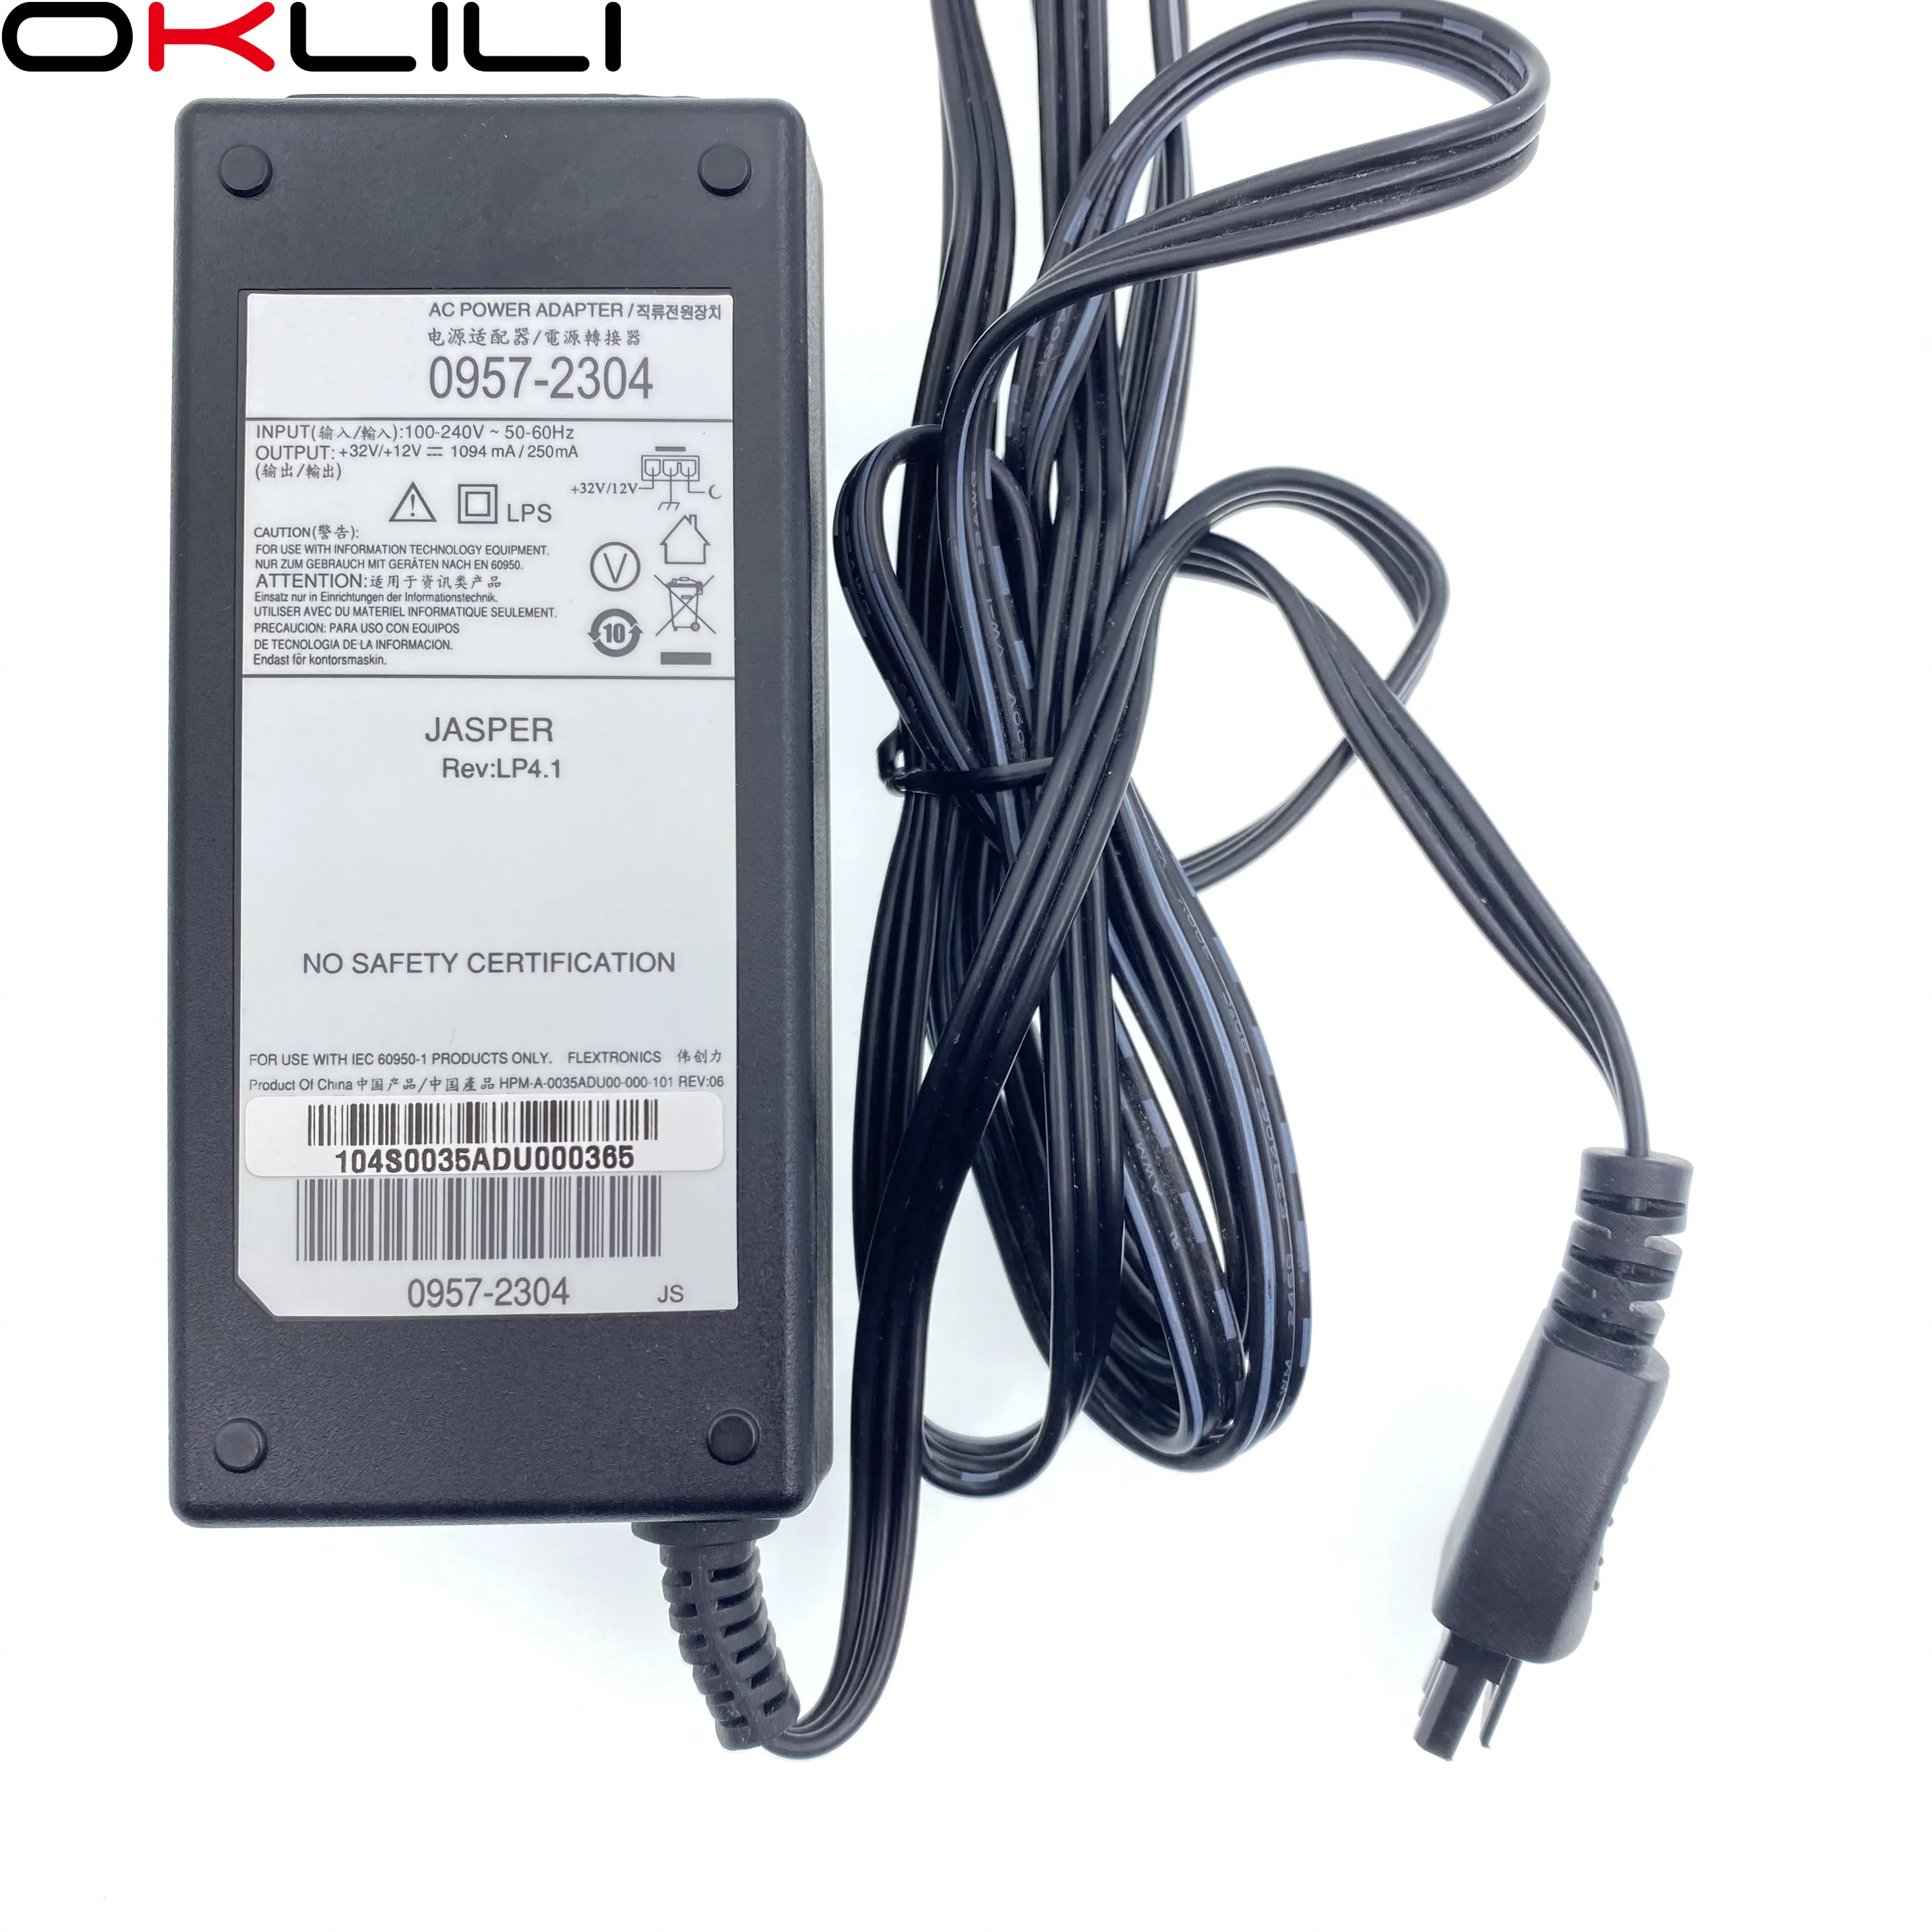 1 X 0957-2304 AC Adapter Charger Power Supply for HP Officejet 6100 6600 6700 7110 7610 7612 3610 3620 Photosmart 7510 7515 7520